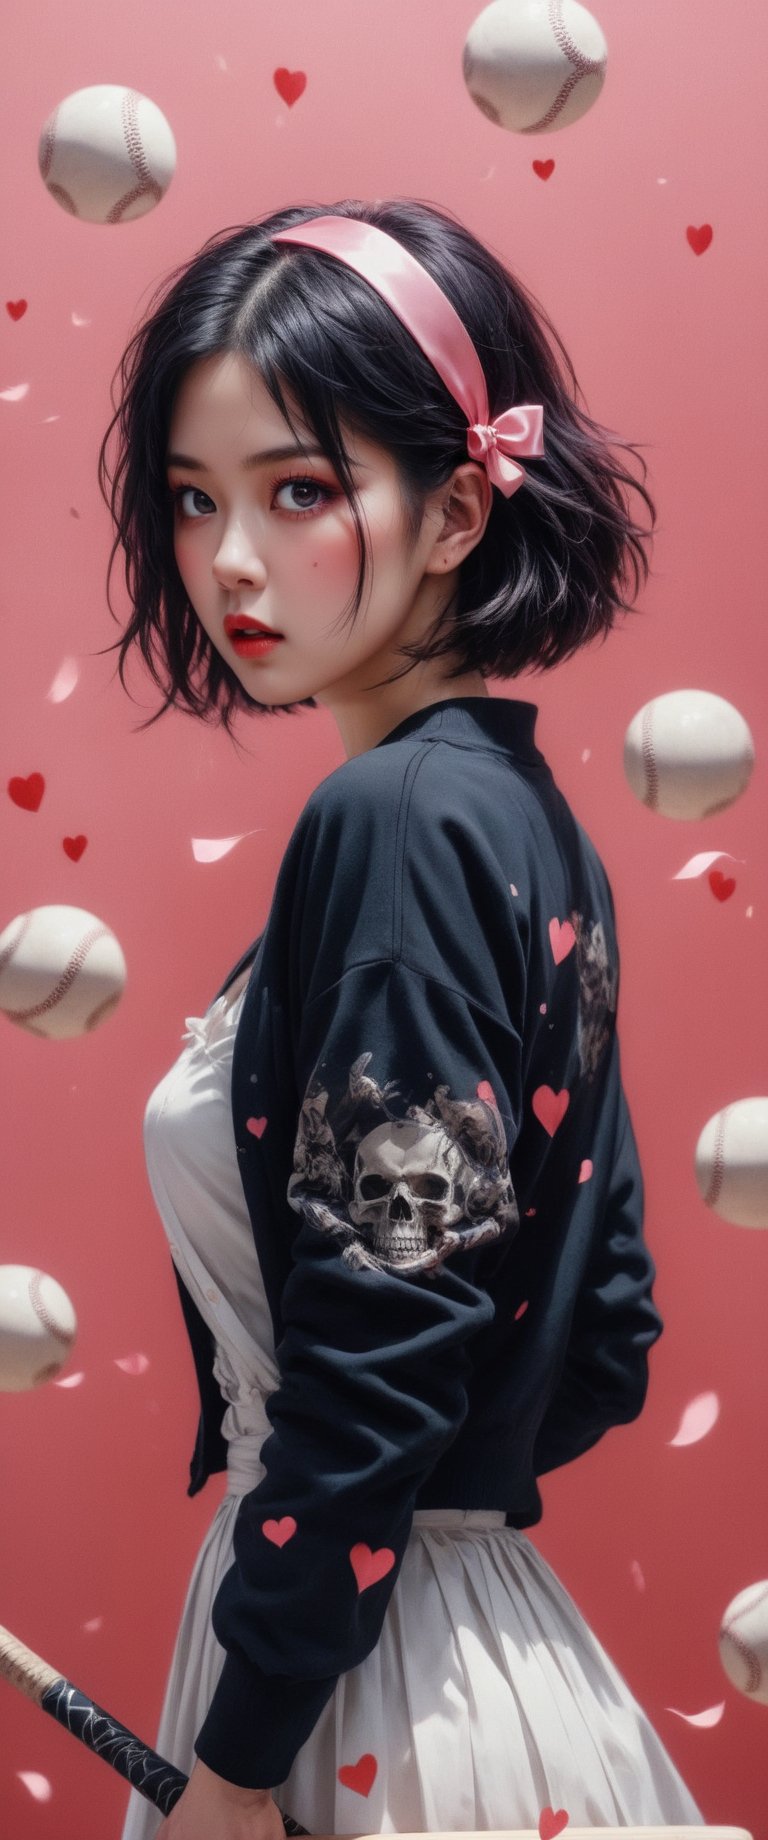 breathtaking ethereal RAW photo of female, ((best quality, 1girl, black hair, hair ornament, hairclip, black eyes, short hair, , black cardigan, cardigan, white dress, red ribbon, , angry,holding baseball bat, baseball bat, blushing, looking at viewer, hearts, sparkles, pink background, 5 fingers, perfect hands )), dark and moody style, perfect face, outstretched perfect hands. masterpiece, professional, award-winning, intricate details, ultra high detailed, 64k, dramatic light, volumetric light, dynamic lighting, Epic, splash art .. ), by james jean $, roby dwi antono $, ross tran $. francis bacon $, michal mraz $, adrian ghenie $, petra cortright $, gerhard richter $, takato yamamoto $, ashley wood, tense atmospheric, , , , sooyaaa,IMGFIX,Comic Book-Style,Movie Aesthetic,action shot,photo r3al ,bad quality image,oil painting, cinematic moviemaker style,Japan Vibes,H effect,koh_yunjung ,koh_yunjung,kwon-nara,sooyaaa,colorful,bones,skulls,armor,han-hyoju-xl ,DonMn1ghtm4reXL, ct-fujiii,ct-jeniiii, ct-goeuun,mad-cyberspace,FuturEvoLab-mecha,cinematic_grain_of_film,a frame of an animated film of,score_9,3D,style akirafilm,Wellington22A,Mina Tepes,lucia:_plume_(sinful_oath )_(punishing:_g,VAMPL, FANG-L ,kizuki_rei, ct-eujiiin,Jujutsu Kaisen Season 2 Anime Style,ChaHaeInSL,Mavelle,Uguisu Anko,Zenko
